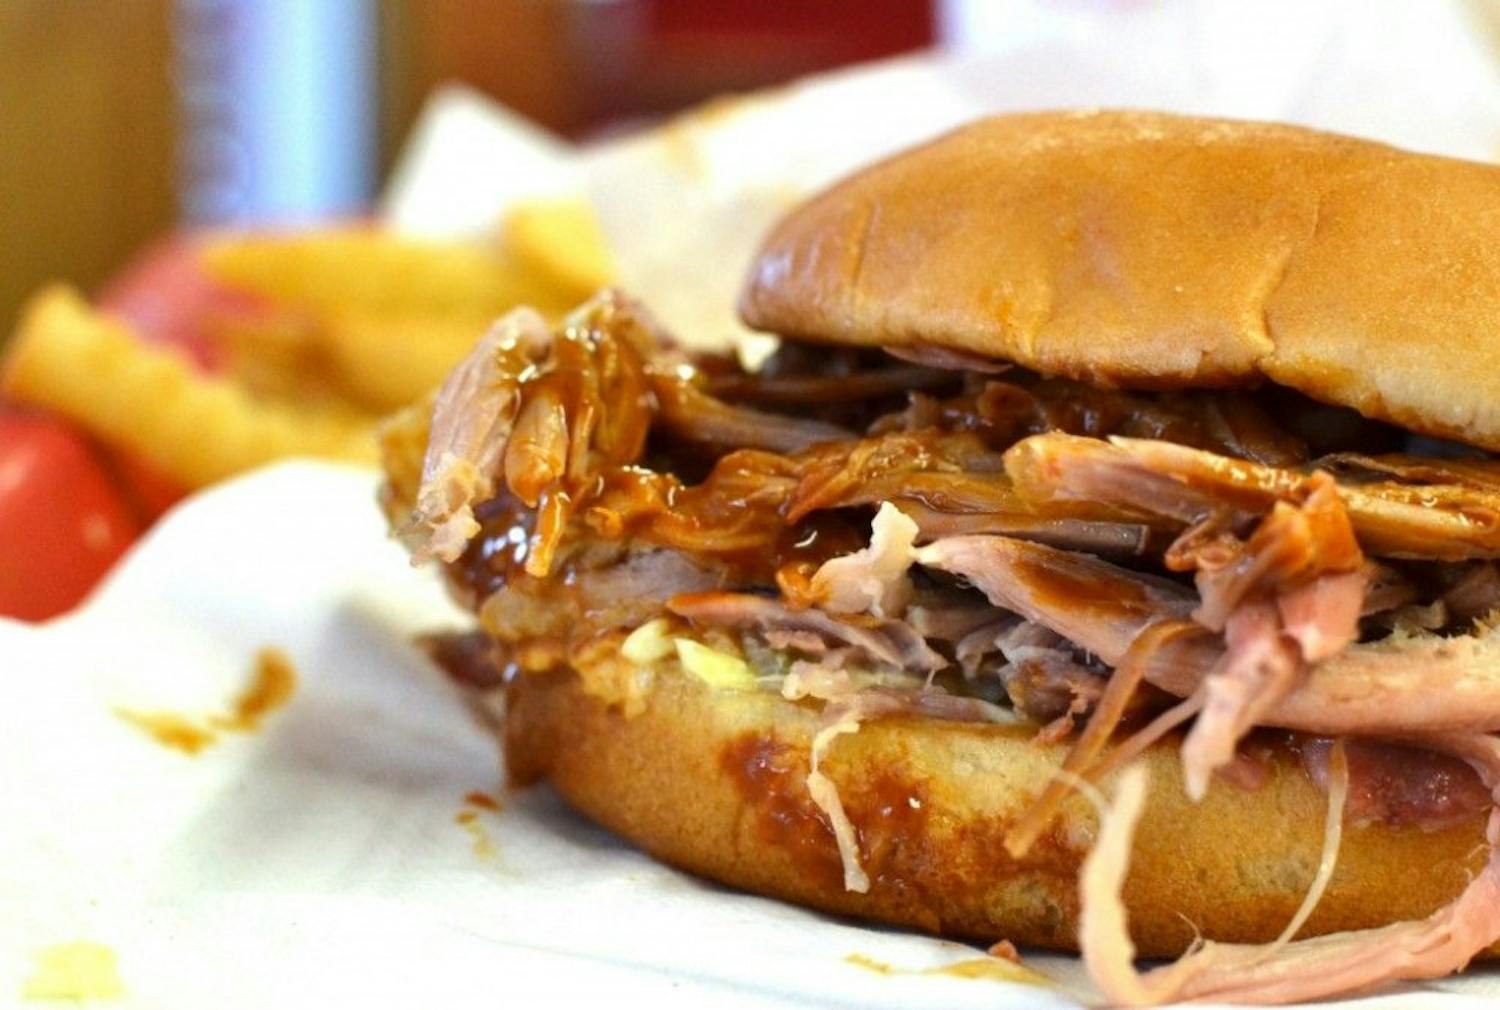 Memphis barbecue is still world famous